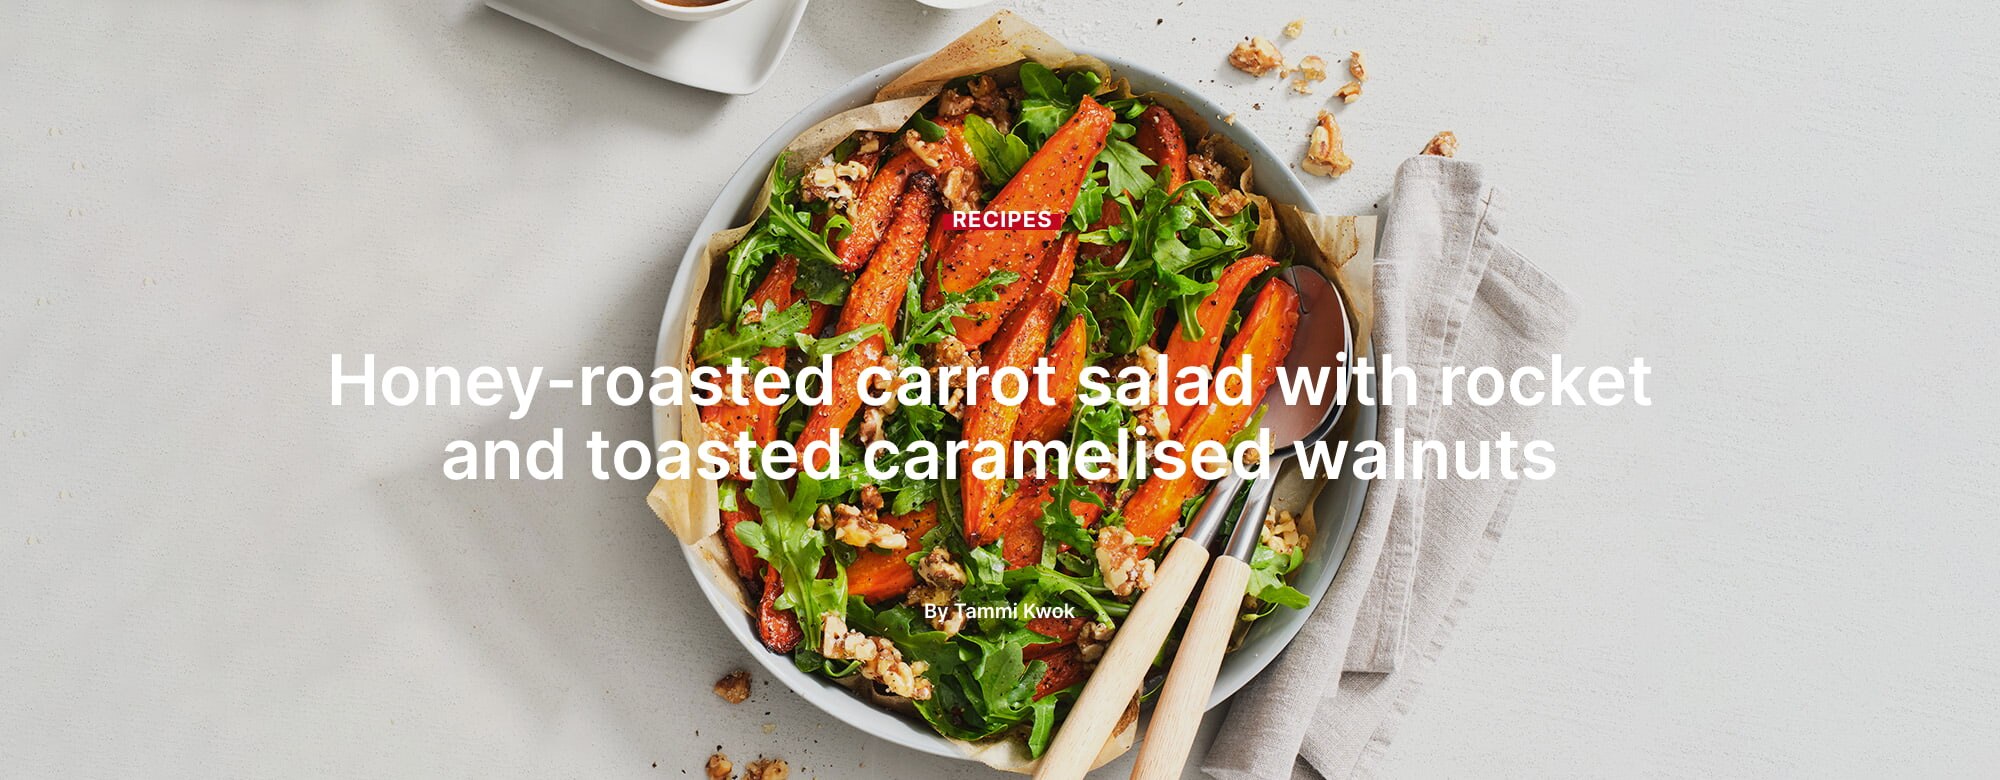 Honey-roasted carrot salad with rocket
and toasted caramelised walnuts